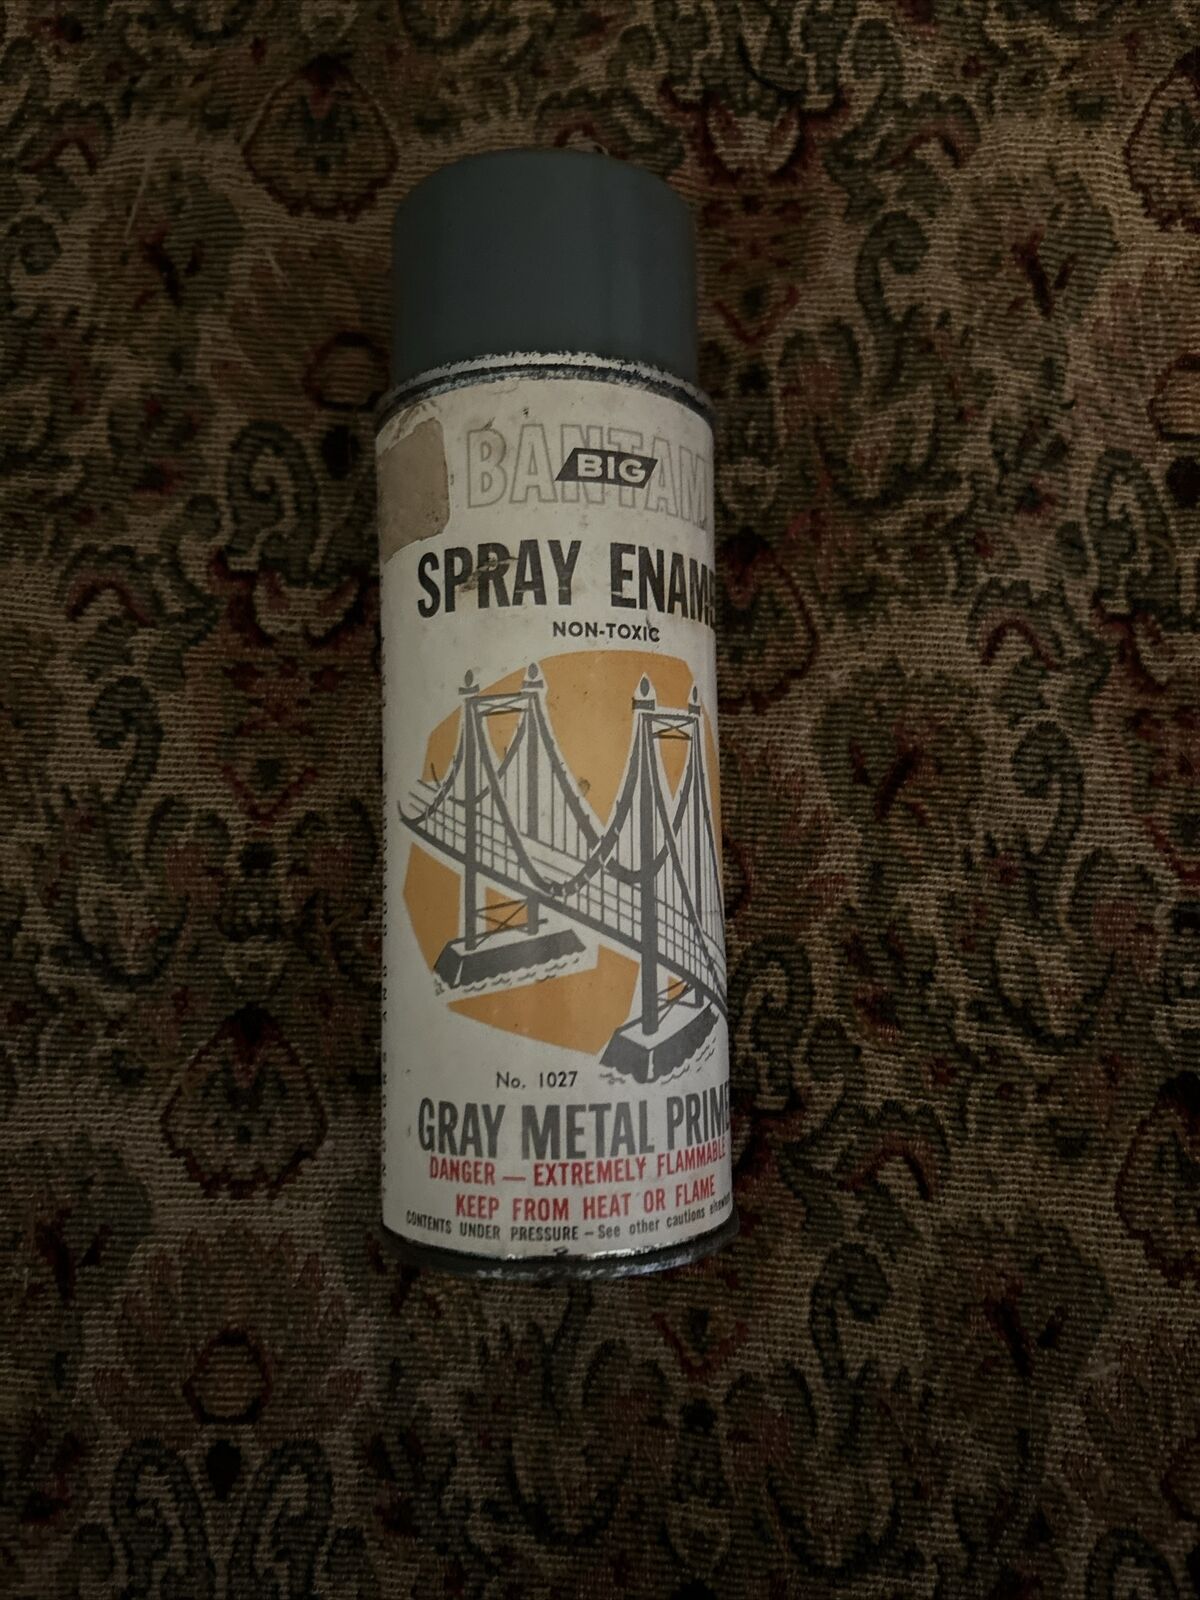 Vintage Extremely RARE Bantam Spray Paint Can NOT SEEN ON EBAY # 1027 Gray PAPER